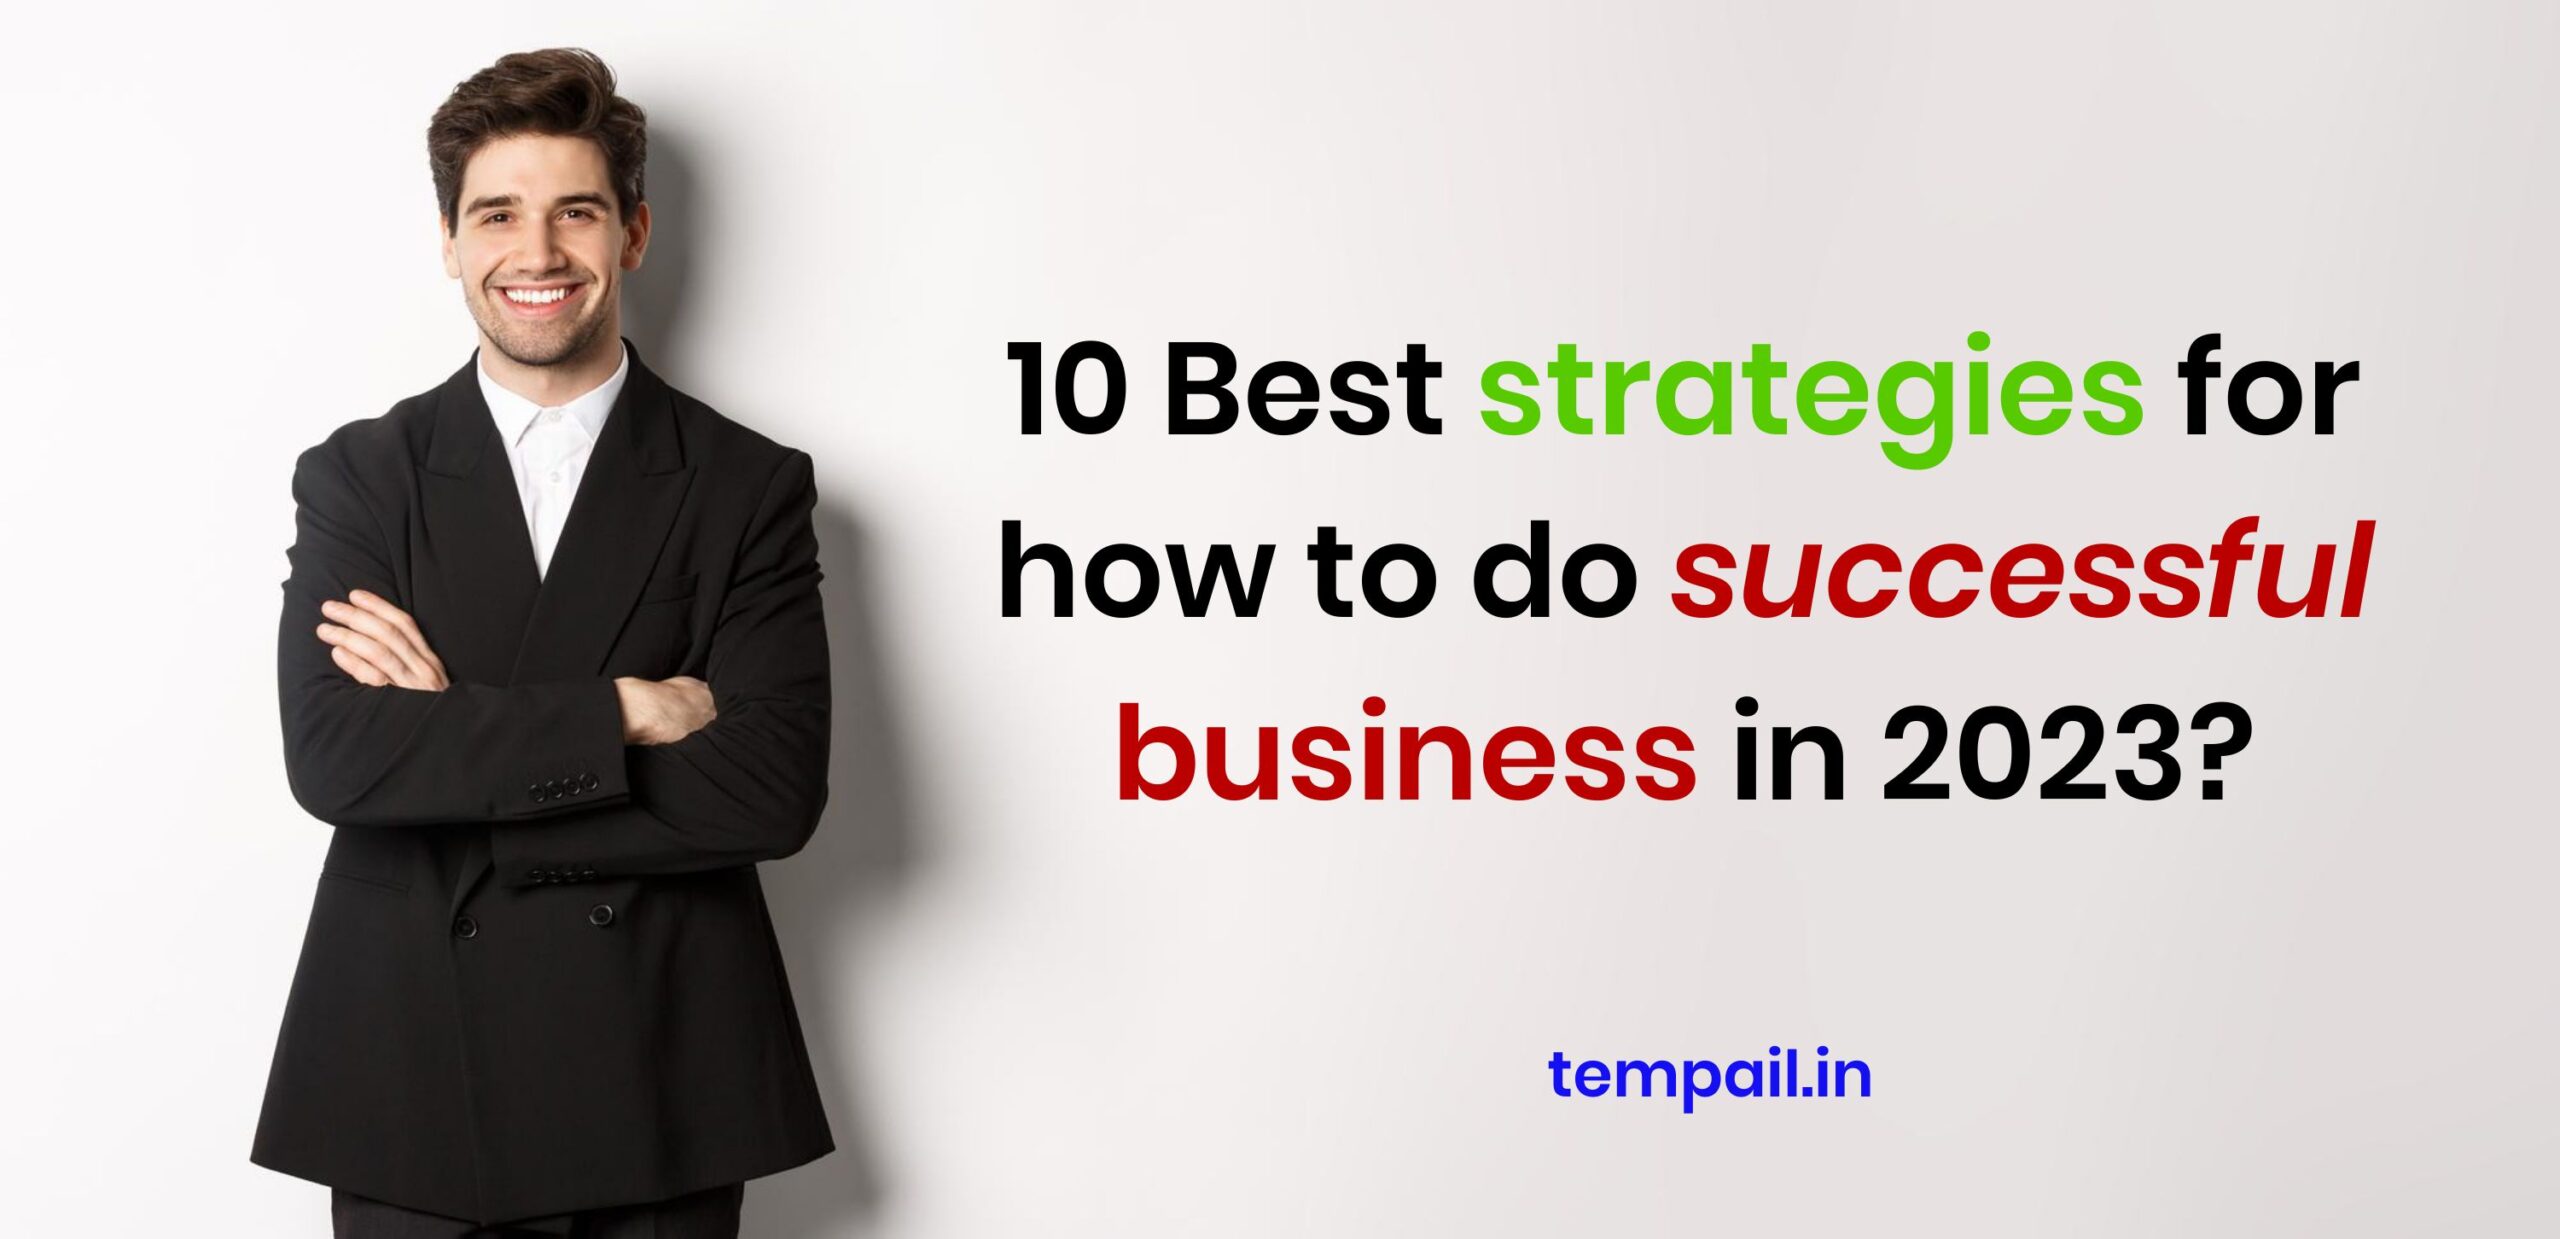 10 best strategies for how to do successful business in 2023?